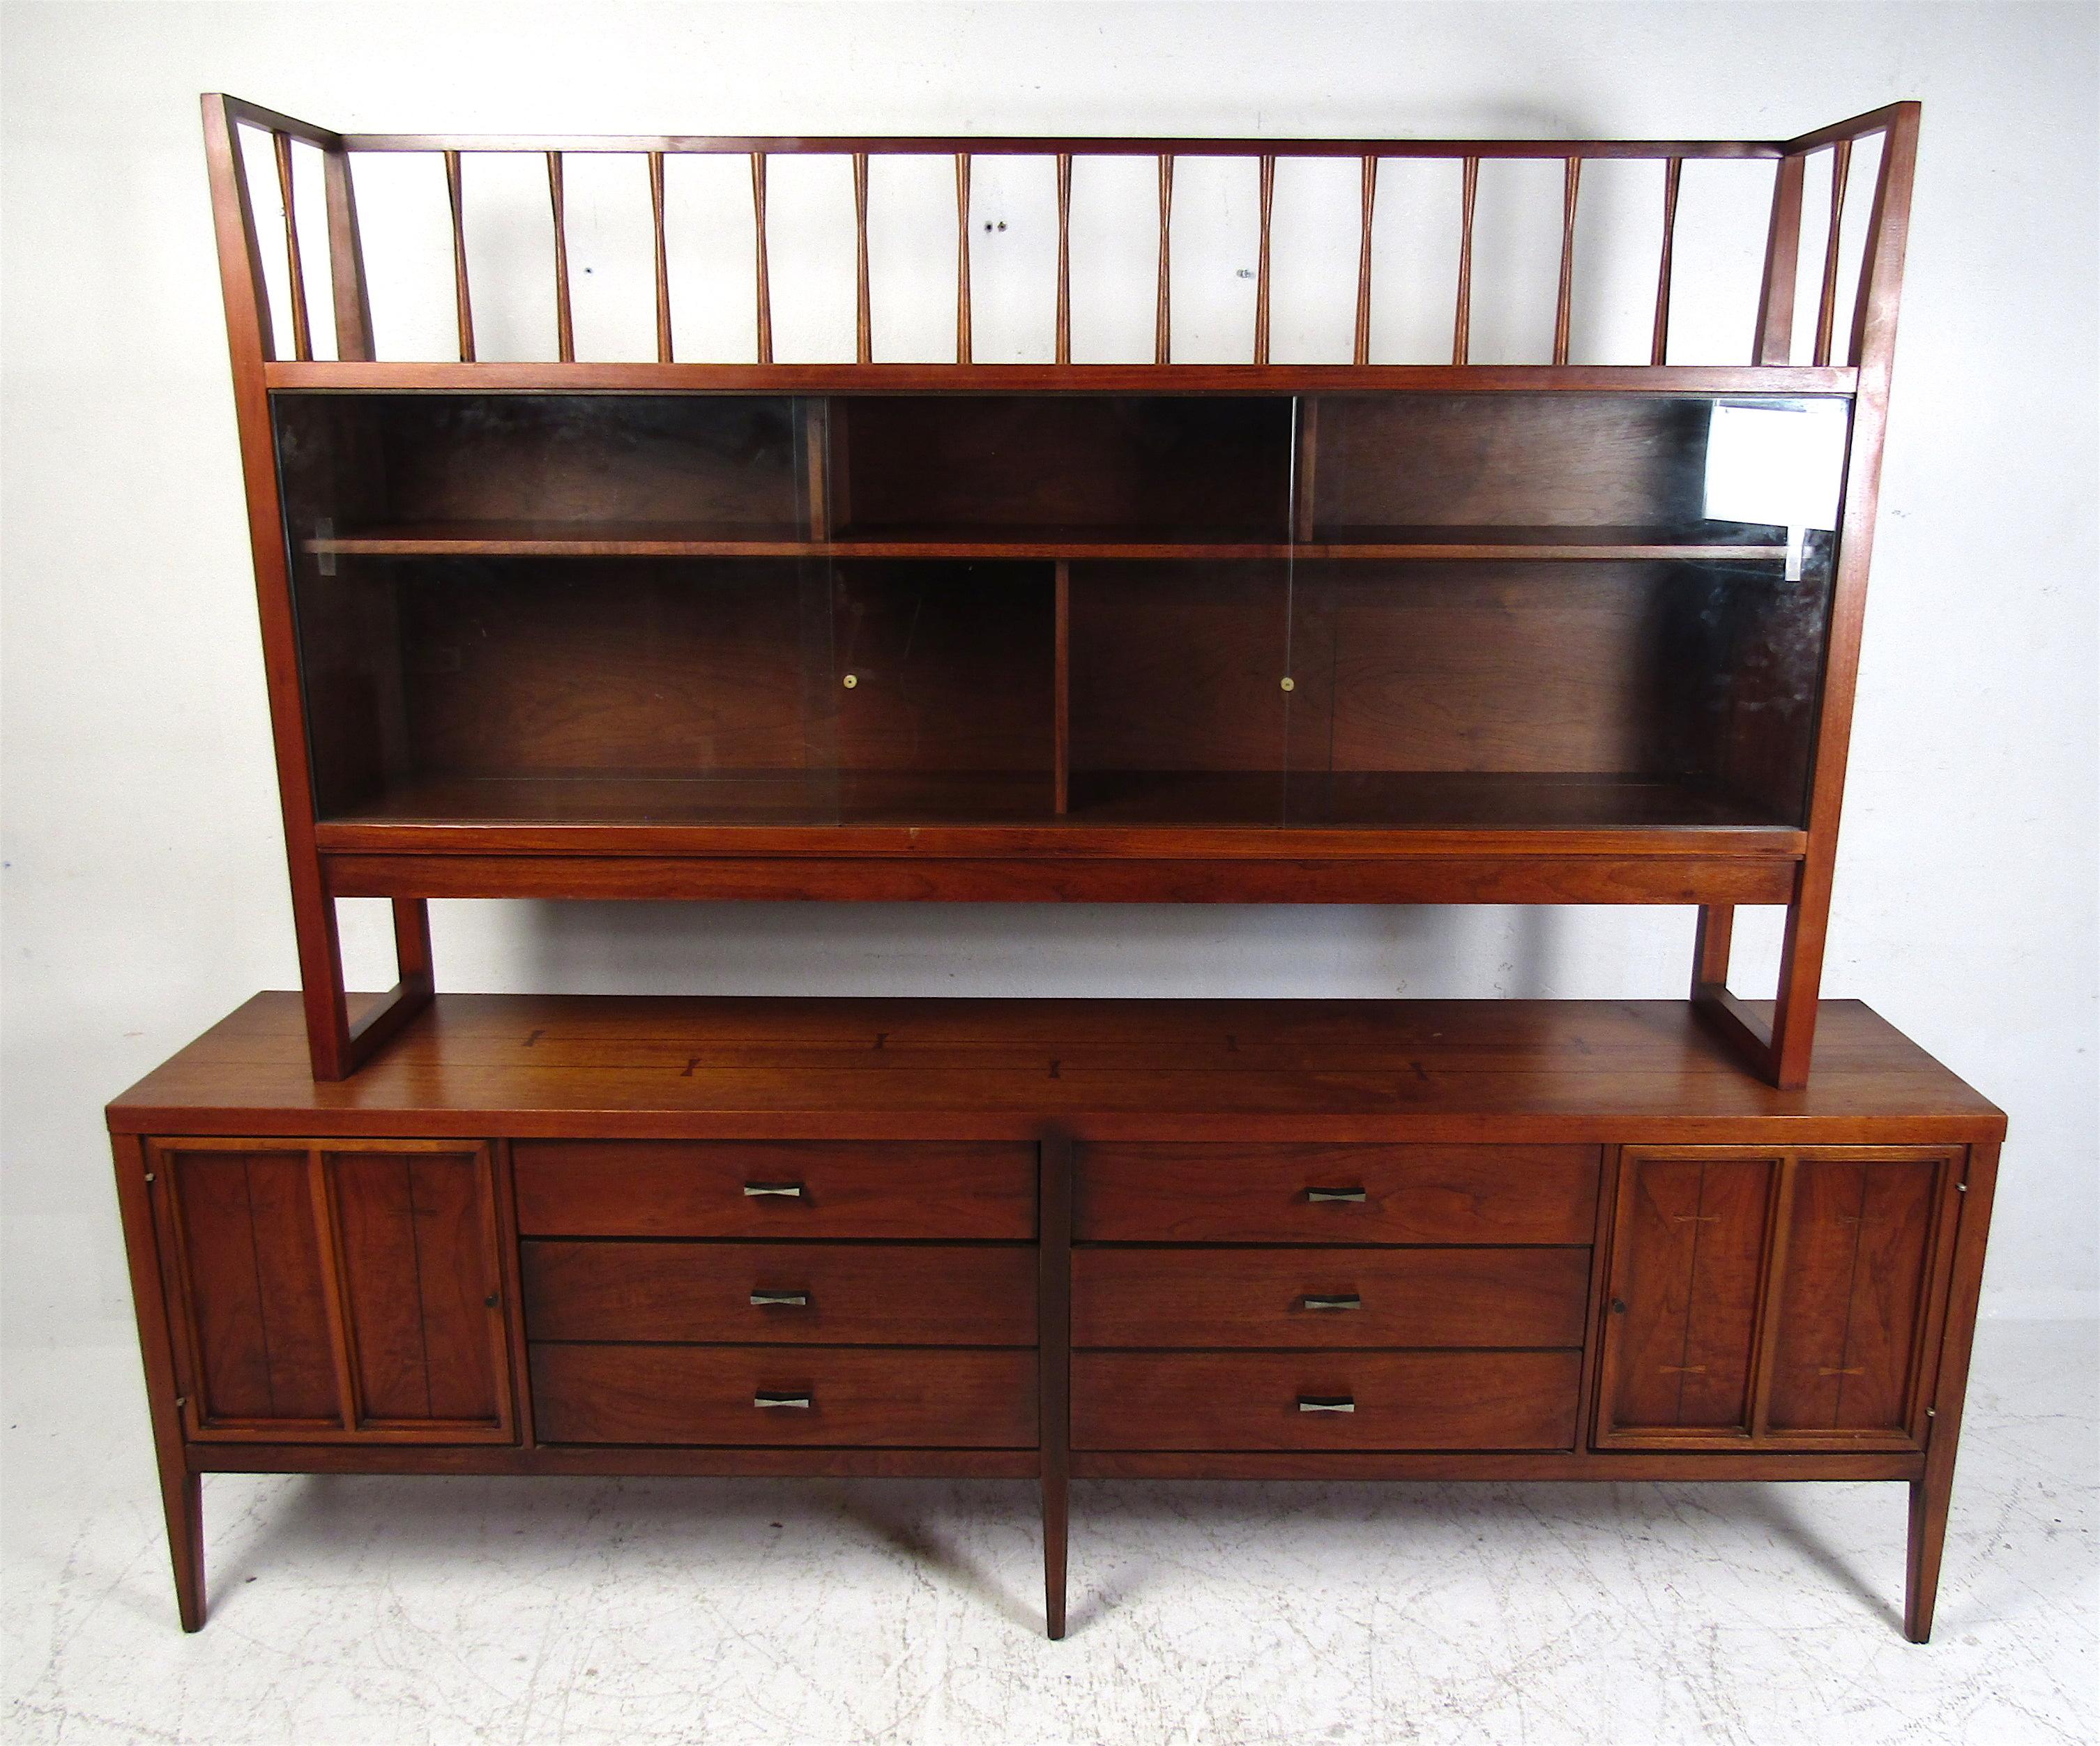 This stunning vintage modern case piece boasts a topper with glass sliding doors and a credenza with tons of storage space. The dark walnut finish with bowtie inlays shows quality craftsmanship. Unusual drawer pulls and sculpted legs add to the